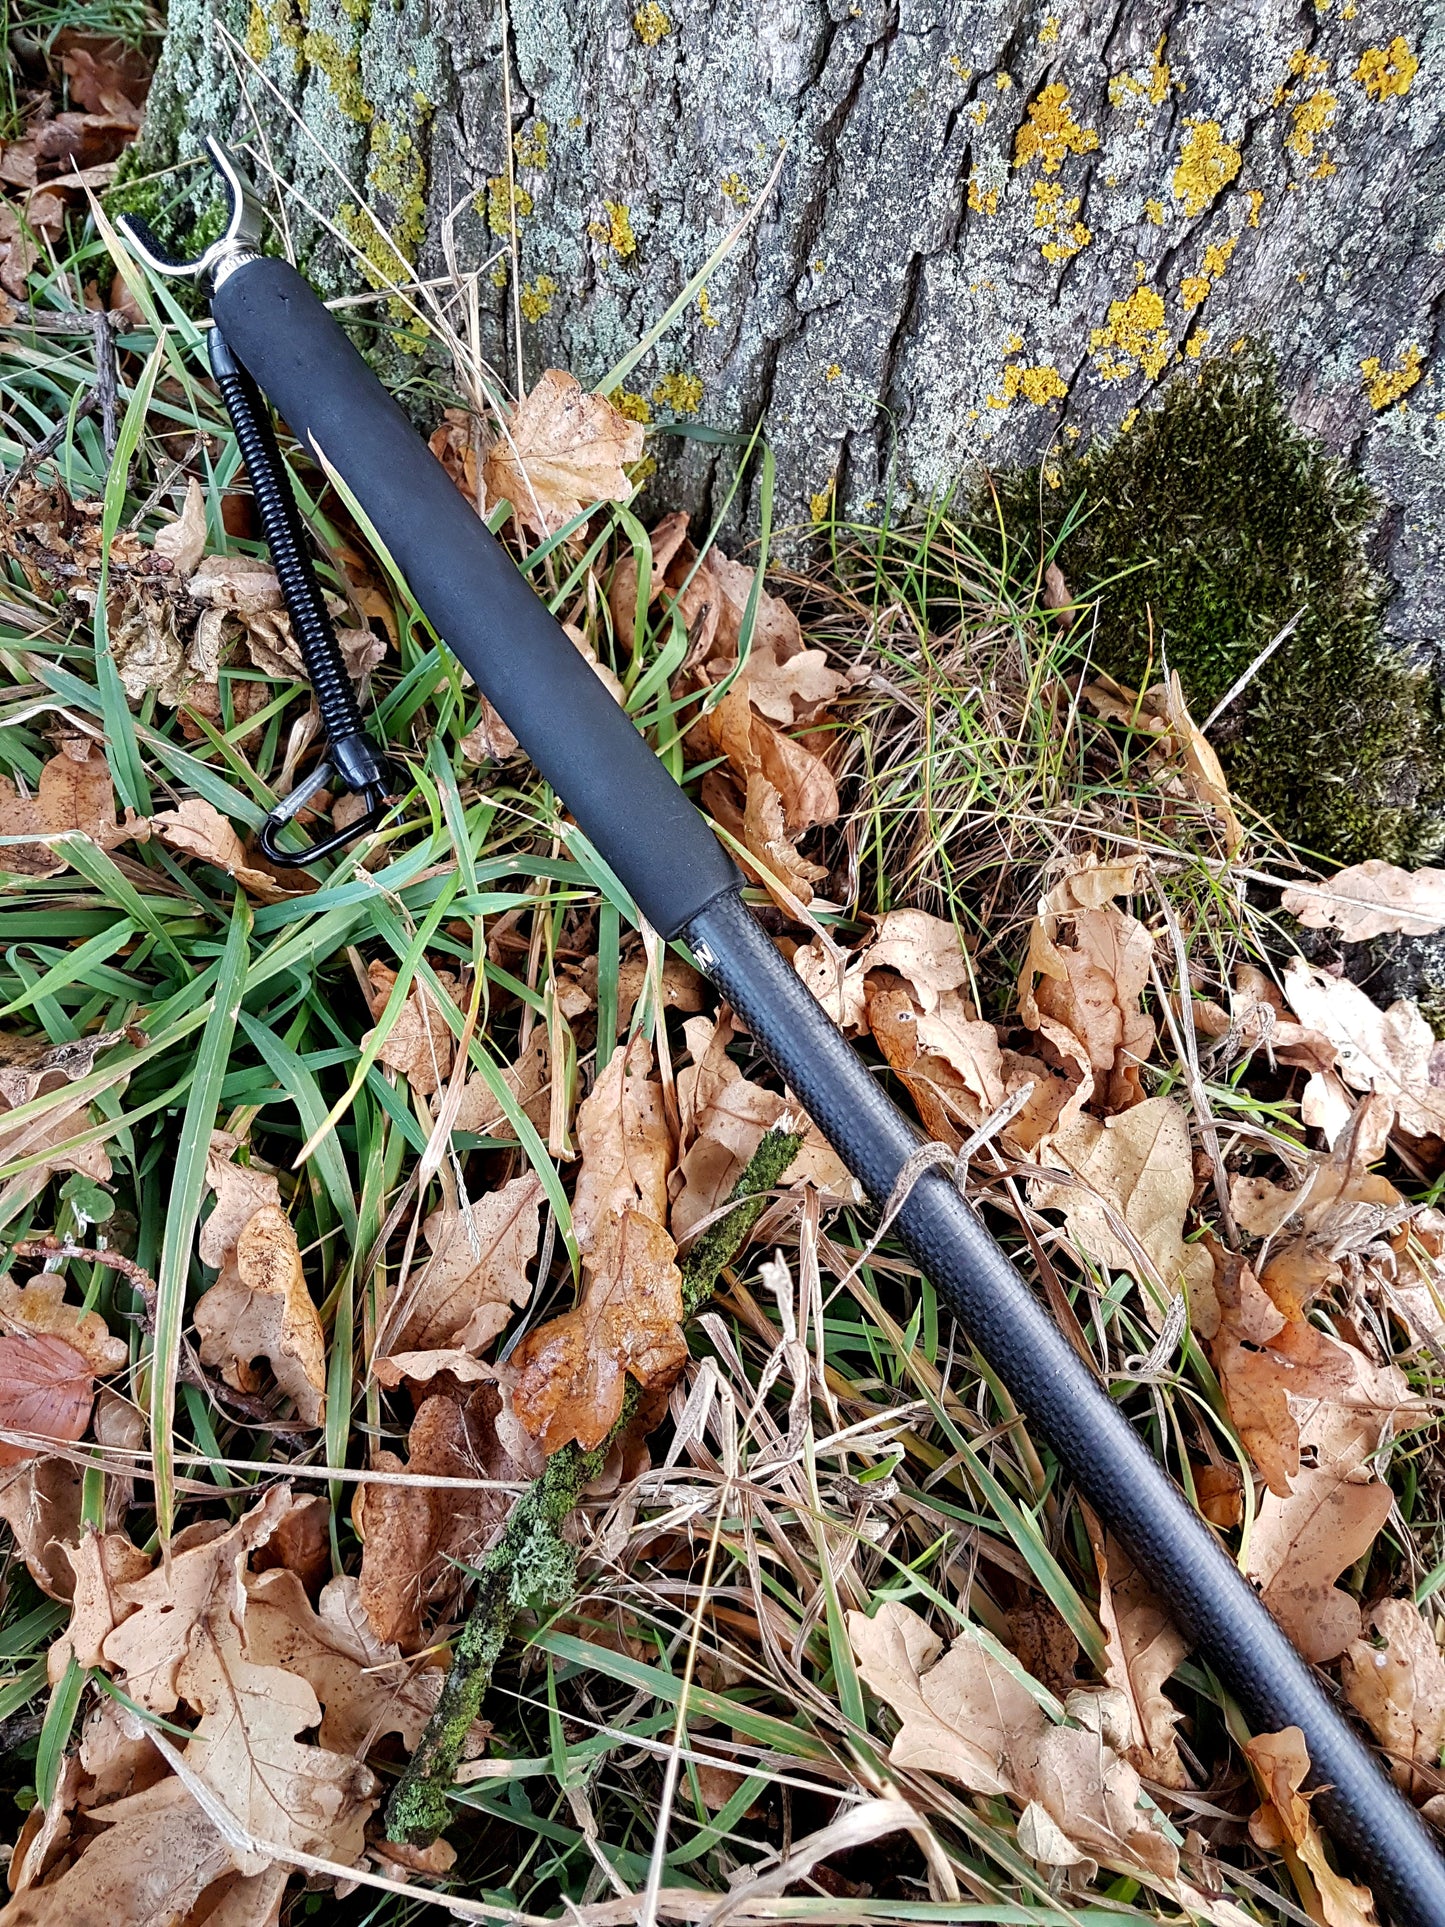 BISON WADING STAFF choice of length and weight